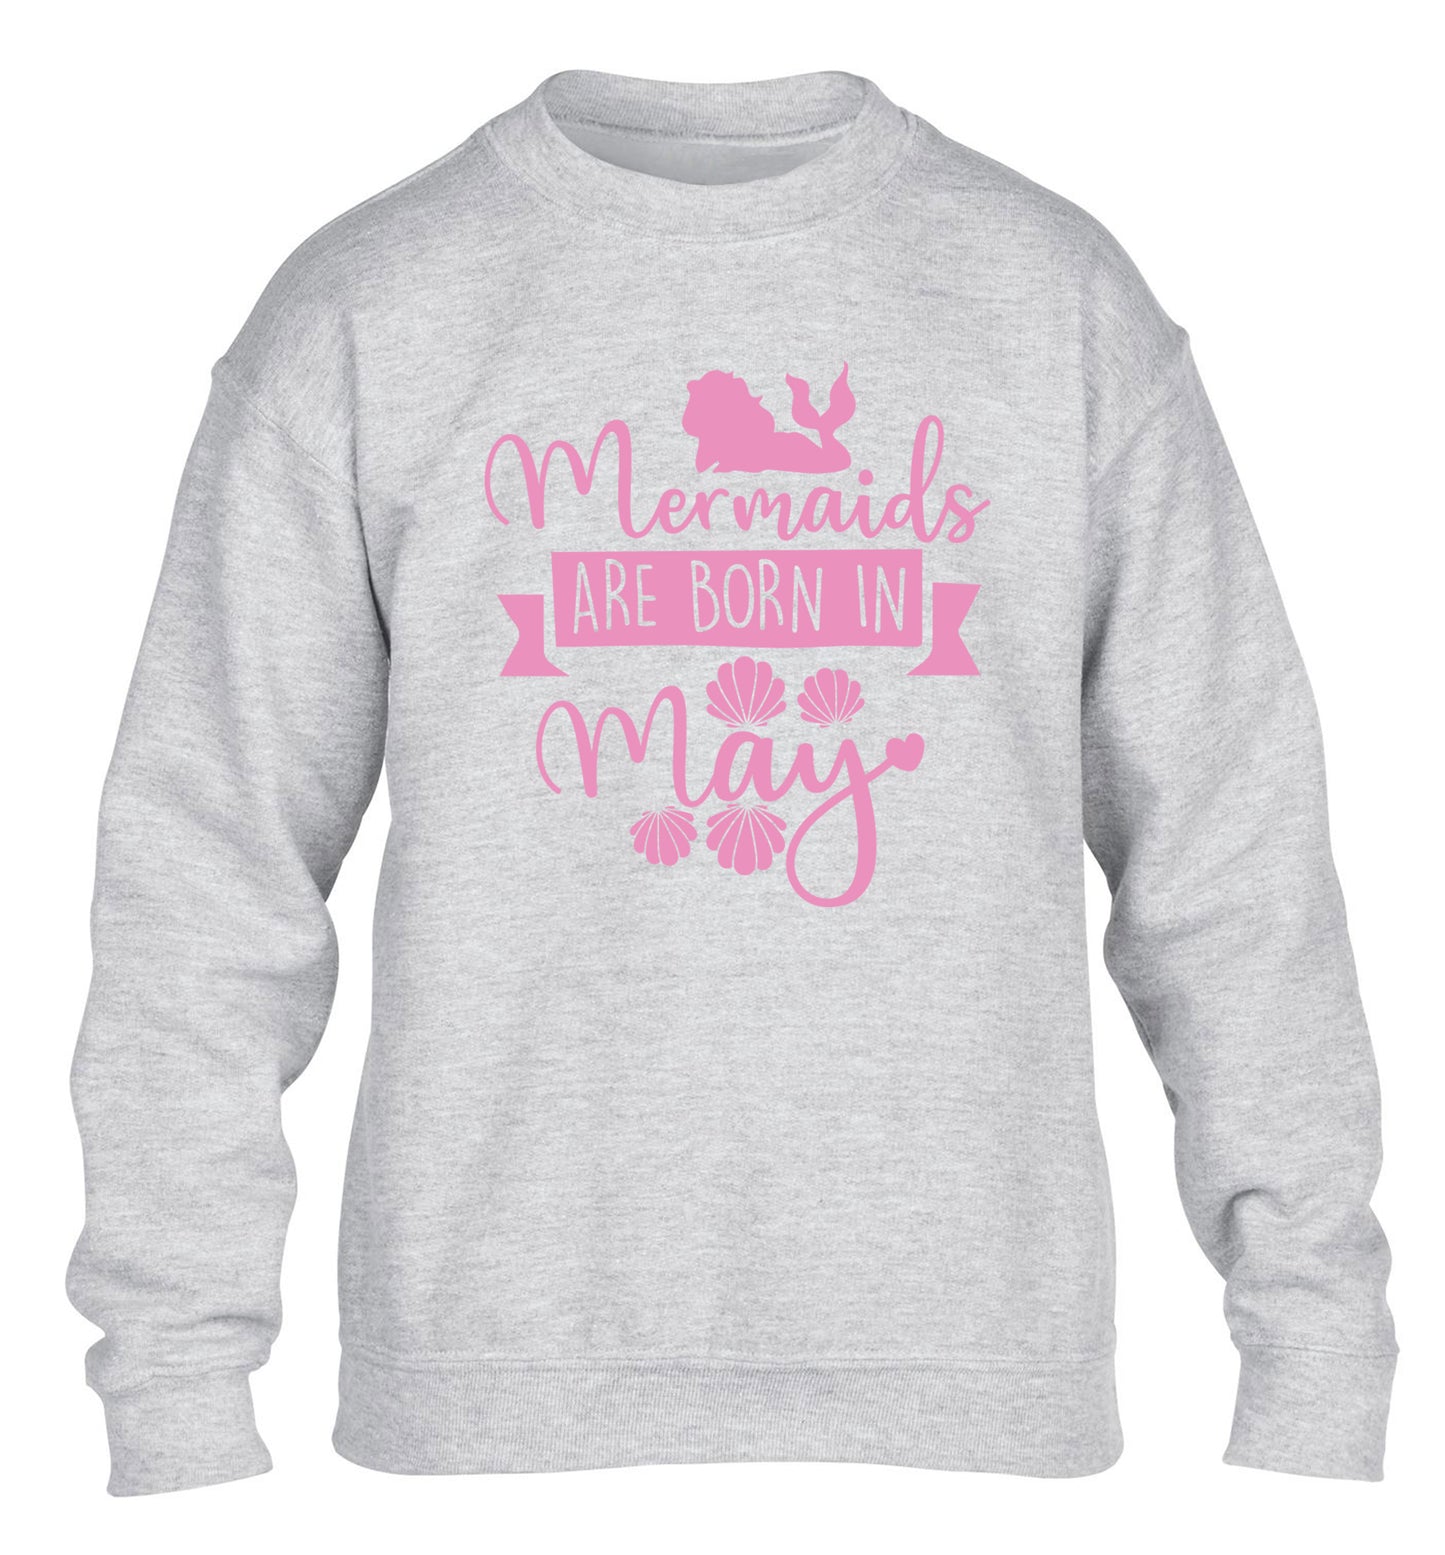 Mermaids are born in May children's grey sweater 12-13 Years